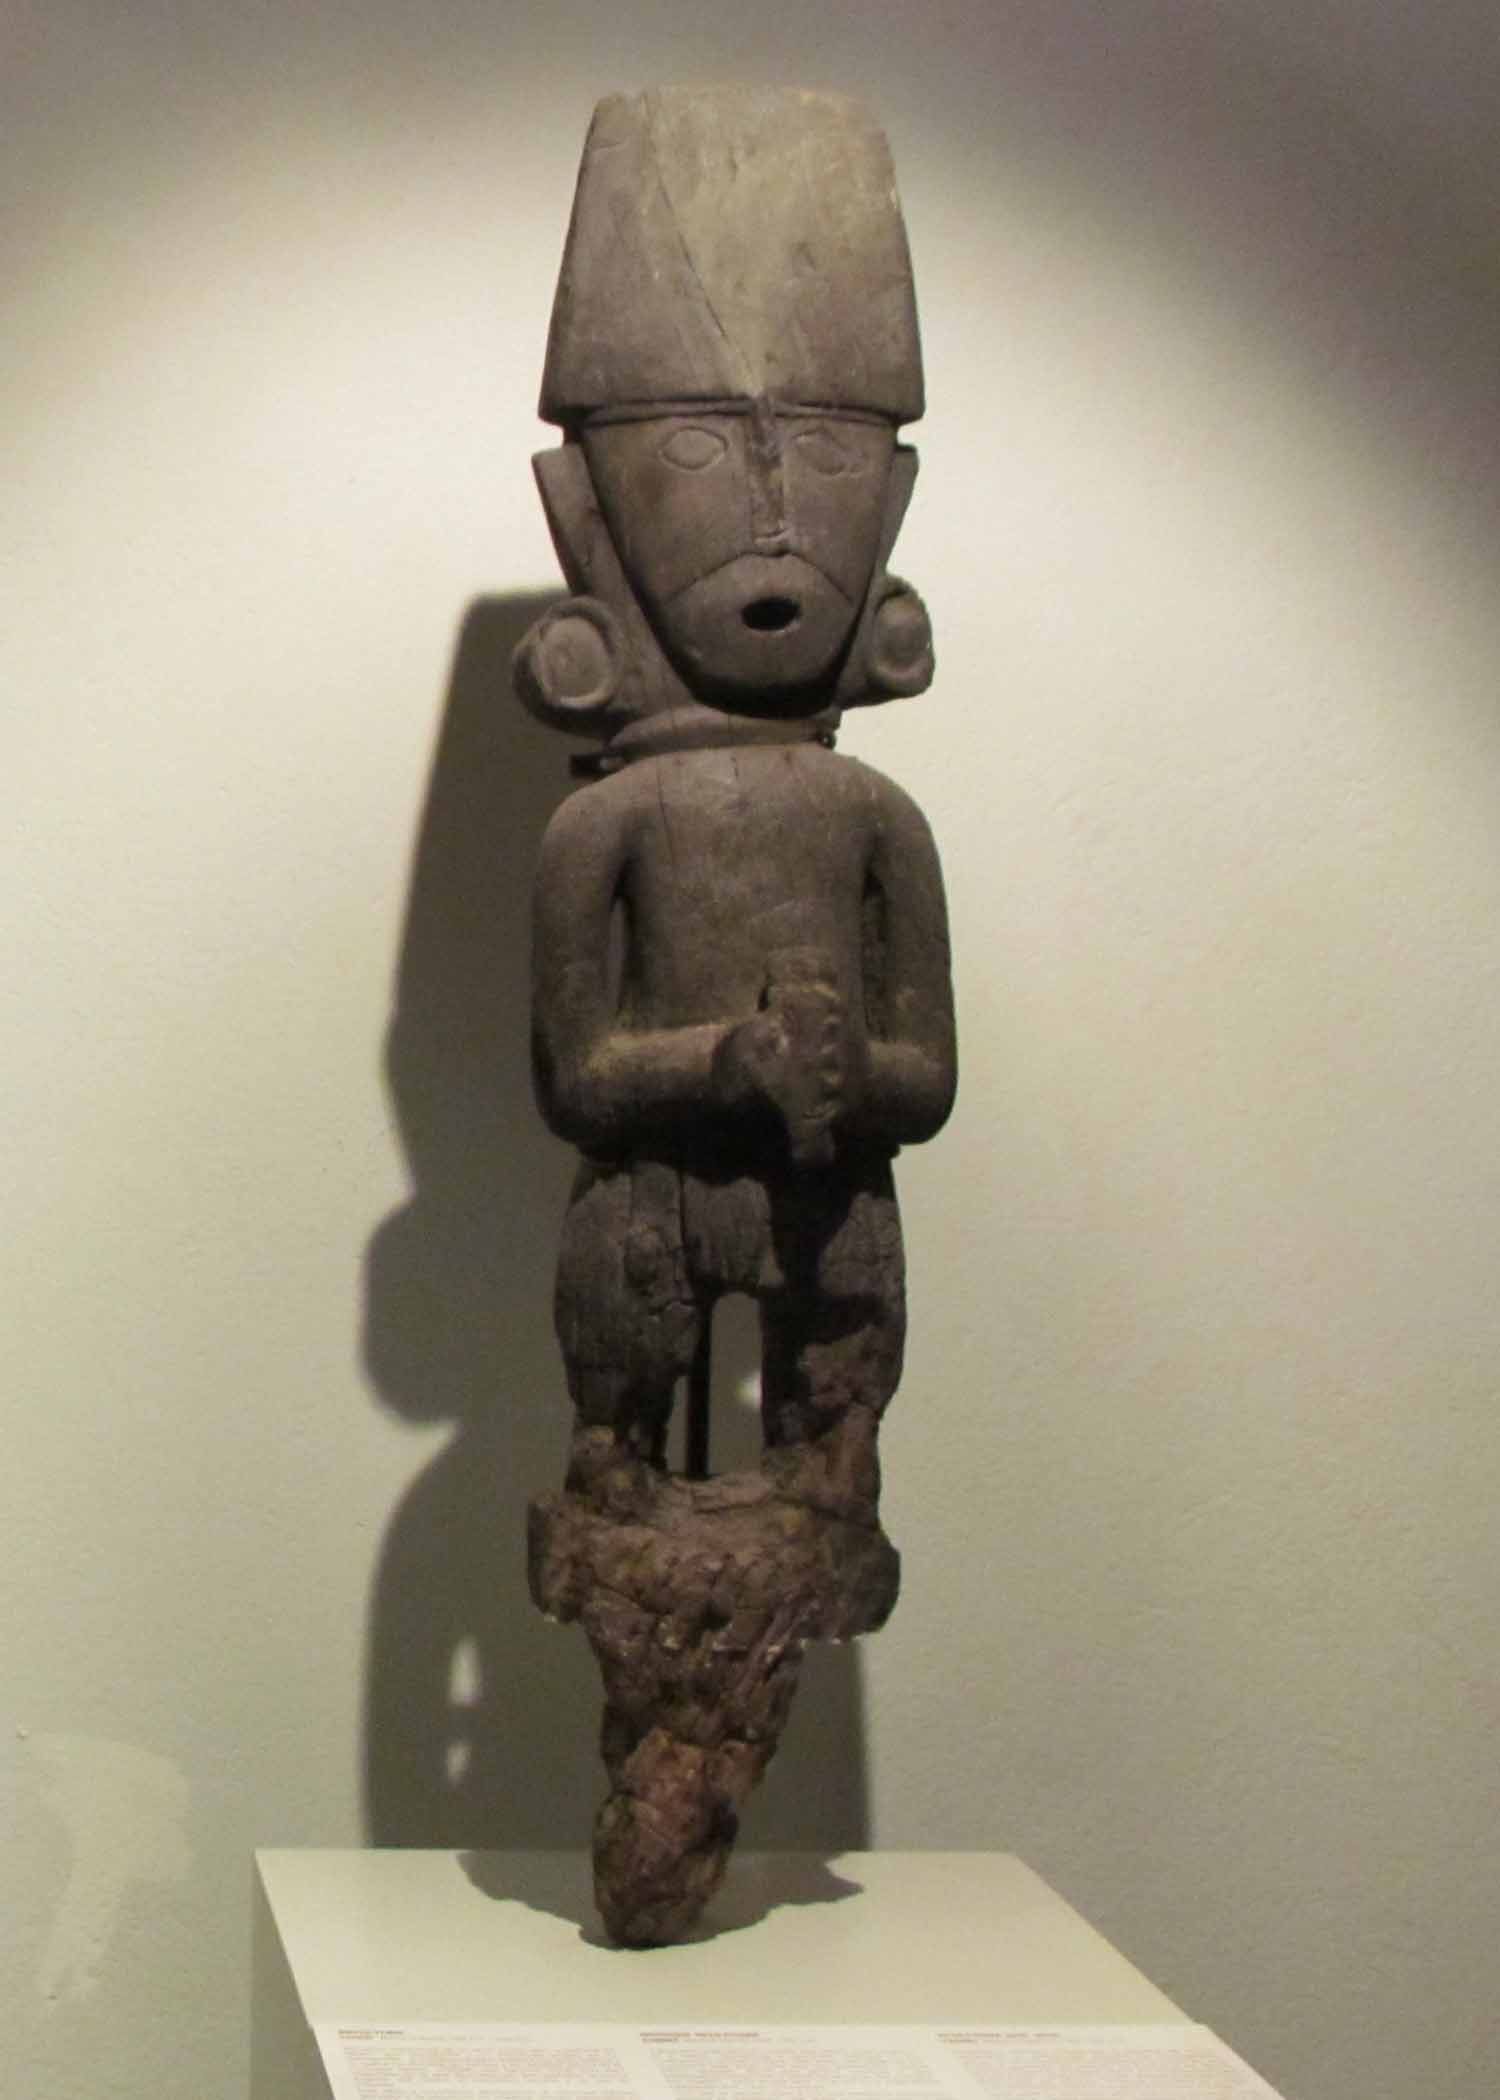 A wood carved figure on display at the Pre-Colombian Art Museum, Cusco, Peru | ©Angela Drake